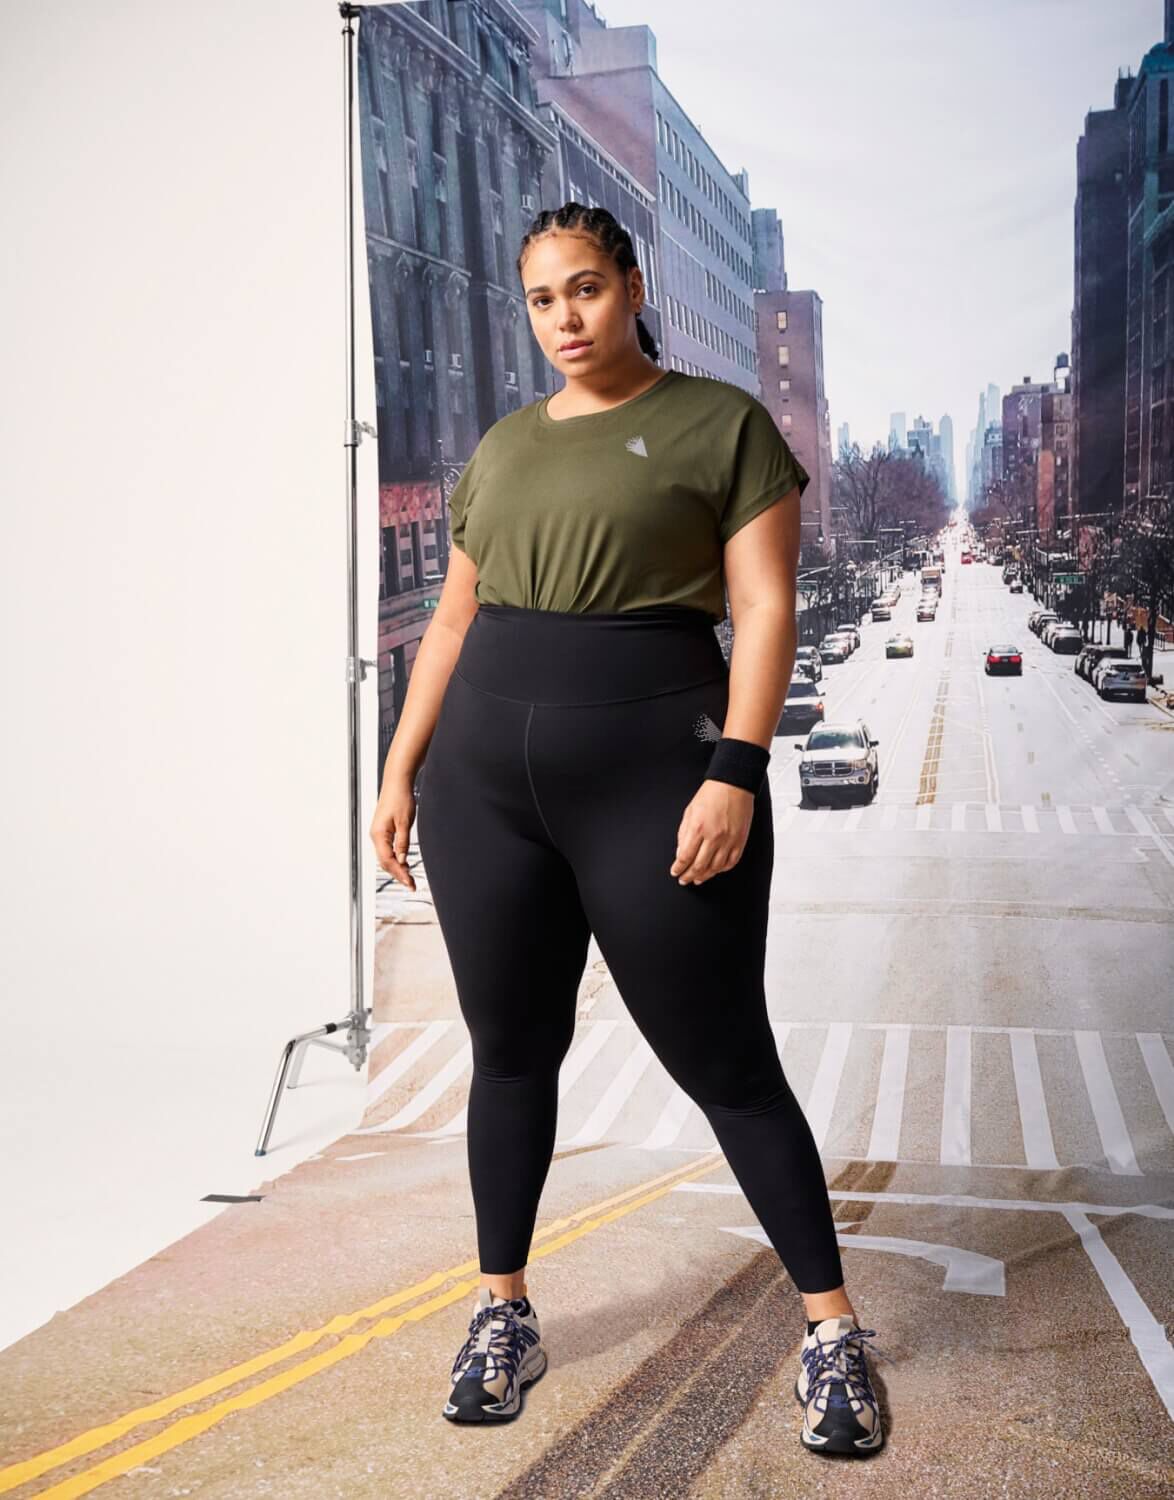 12 Plus Size Leggings Outfits You Should Try This Year - www.carlakiley.com